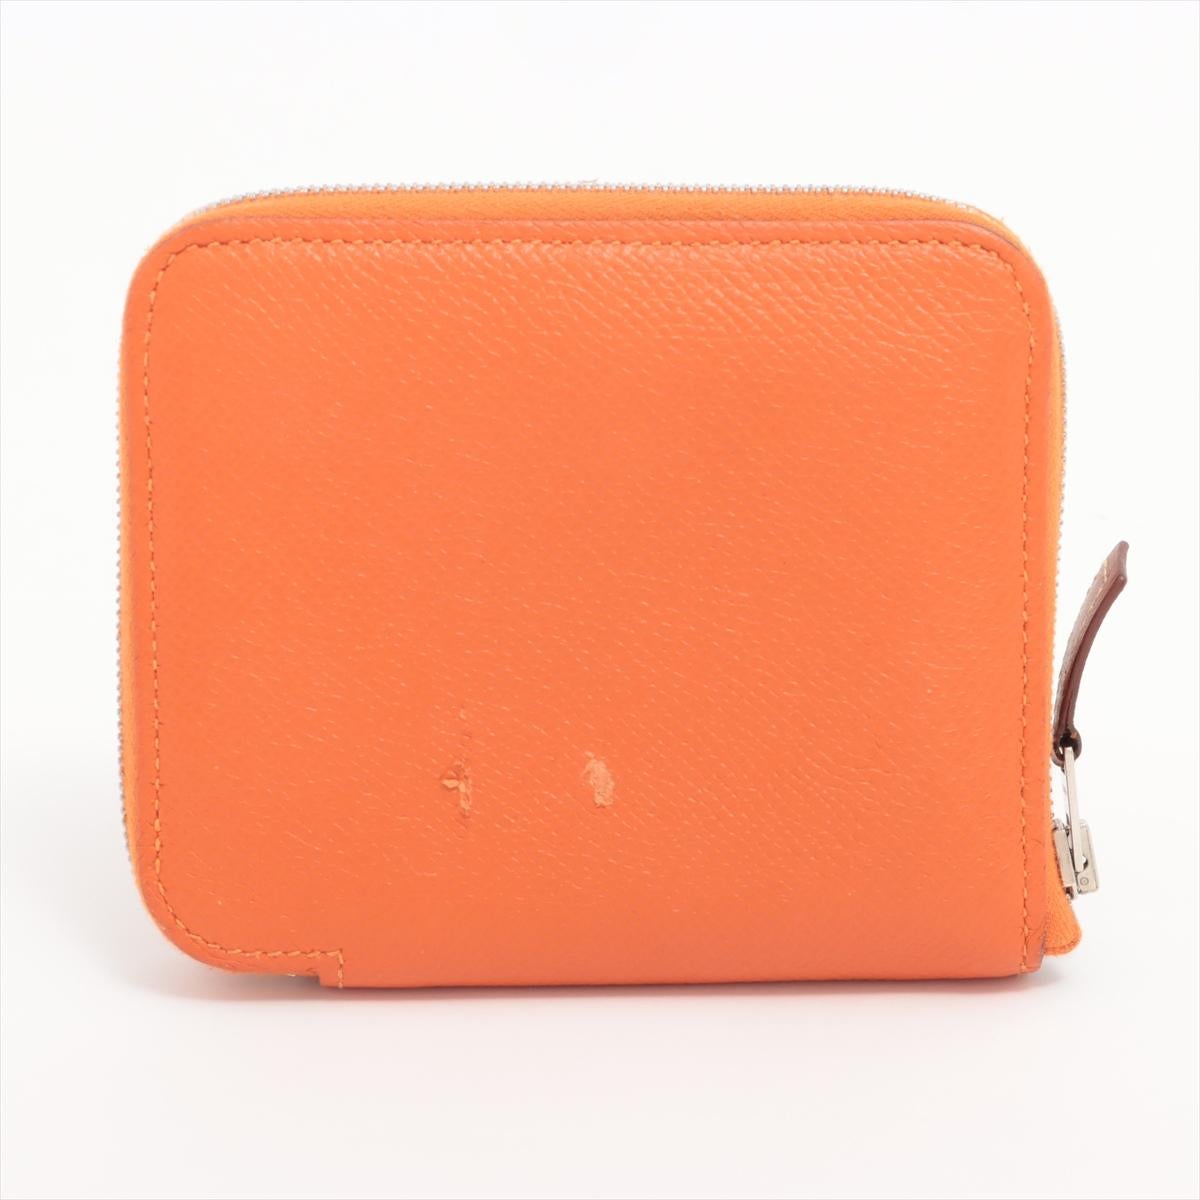 Hermès Zip Around Compact Coin Case Orange In Good Condition For Sale In Indianapolis, IN